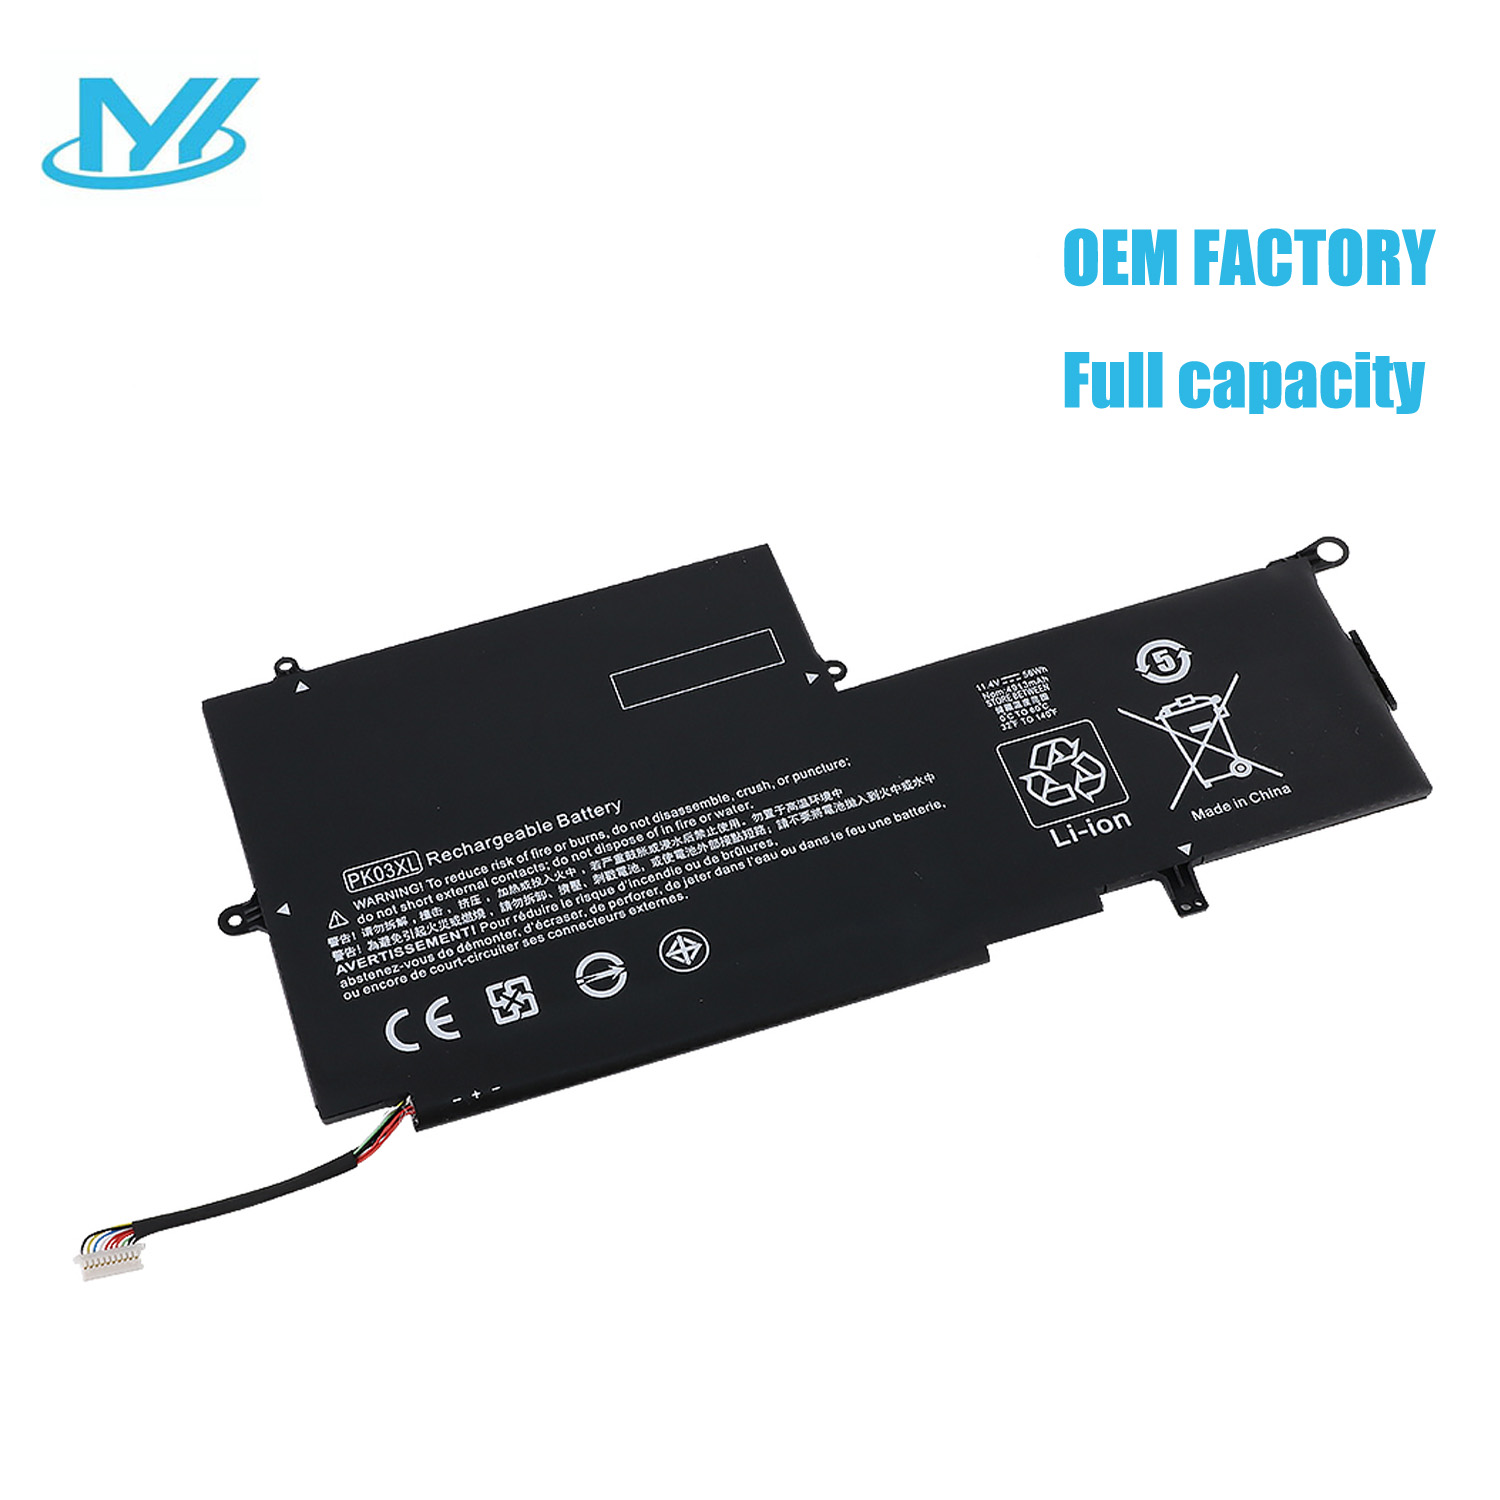 PK03XL rechargeable lithium ion Notebook battery Laptop battery for HP Spectre x360 13-4000ni (L5E62ea) Spectre x360 134000ni (L5E62ea) Spectre x360 13-4000nn (M0C29ea)